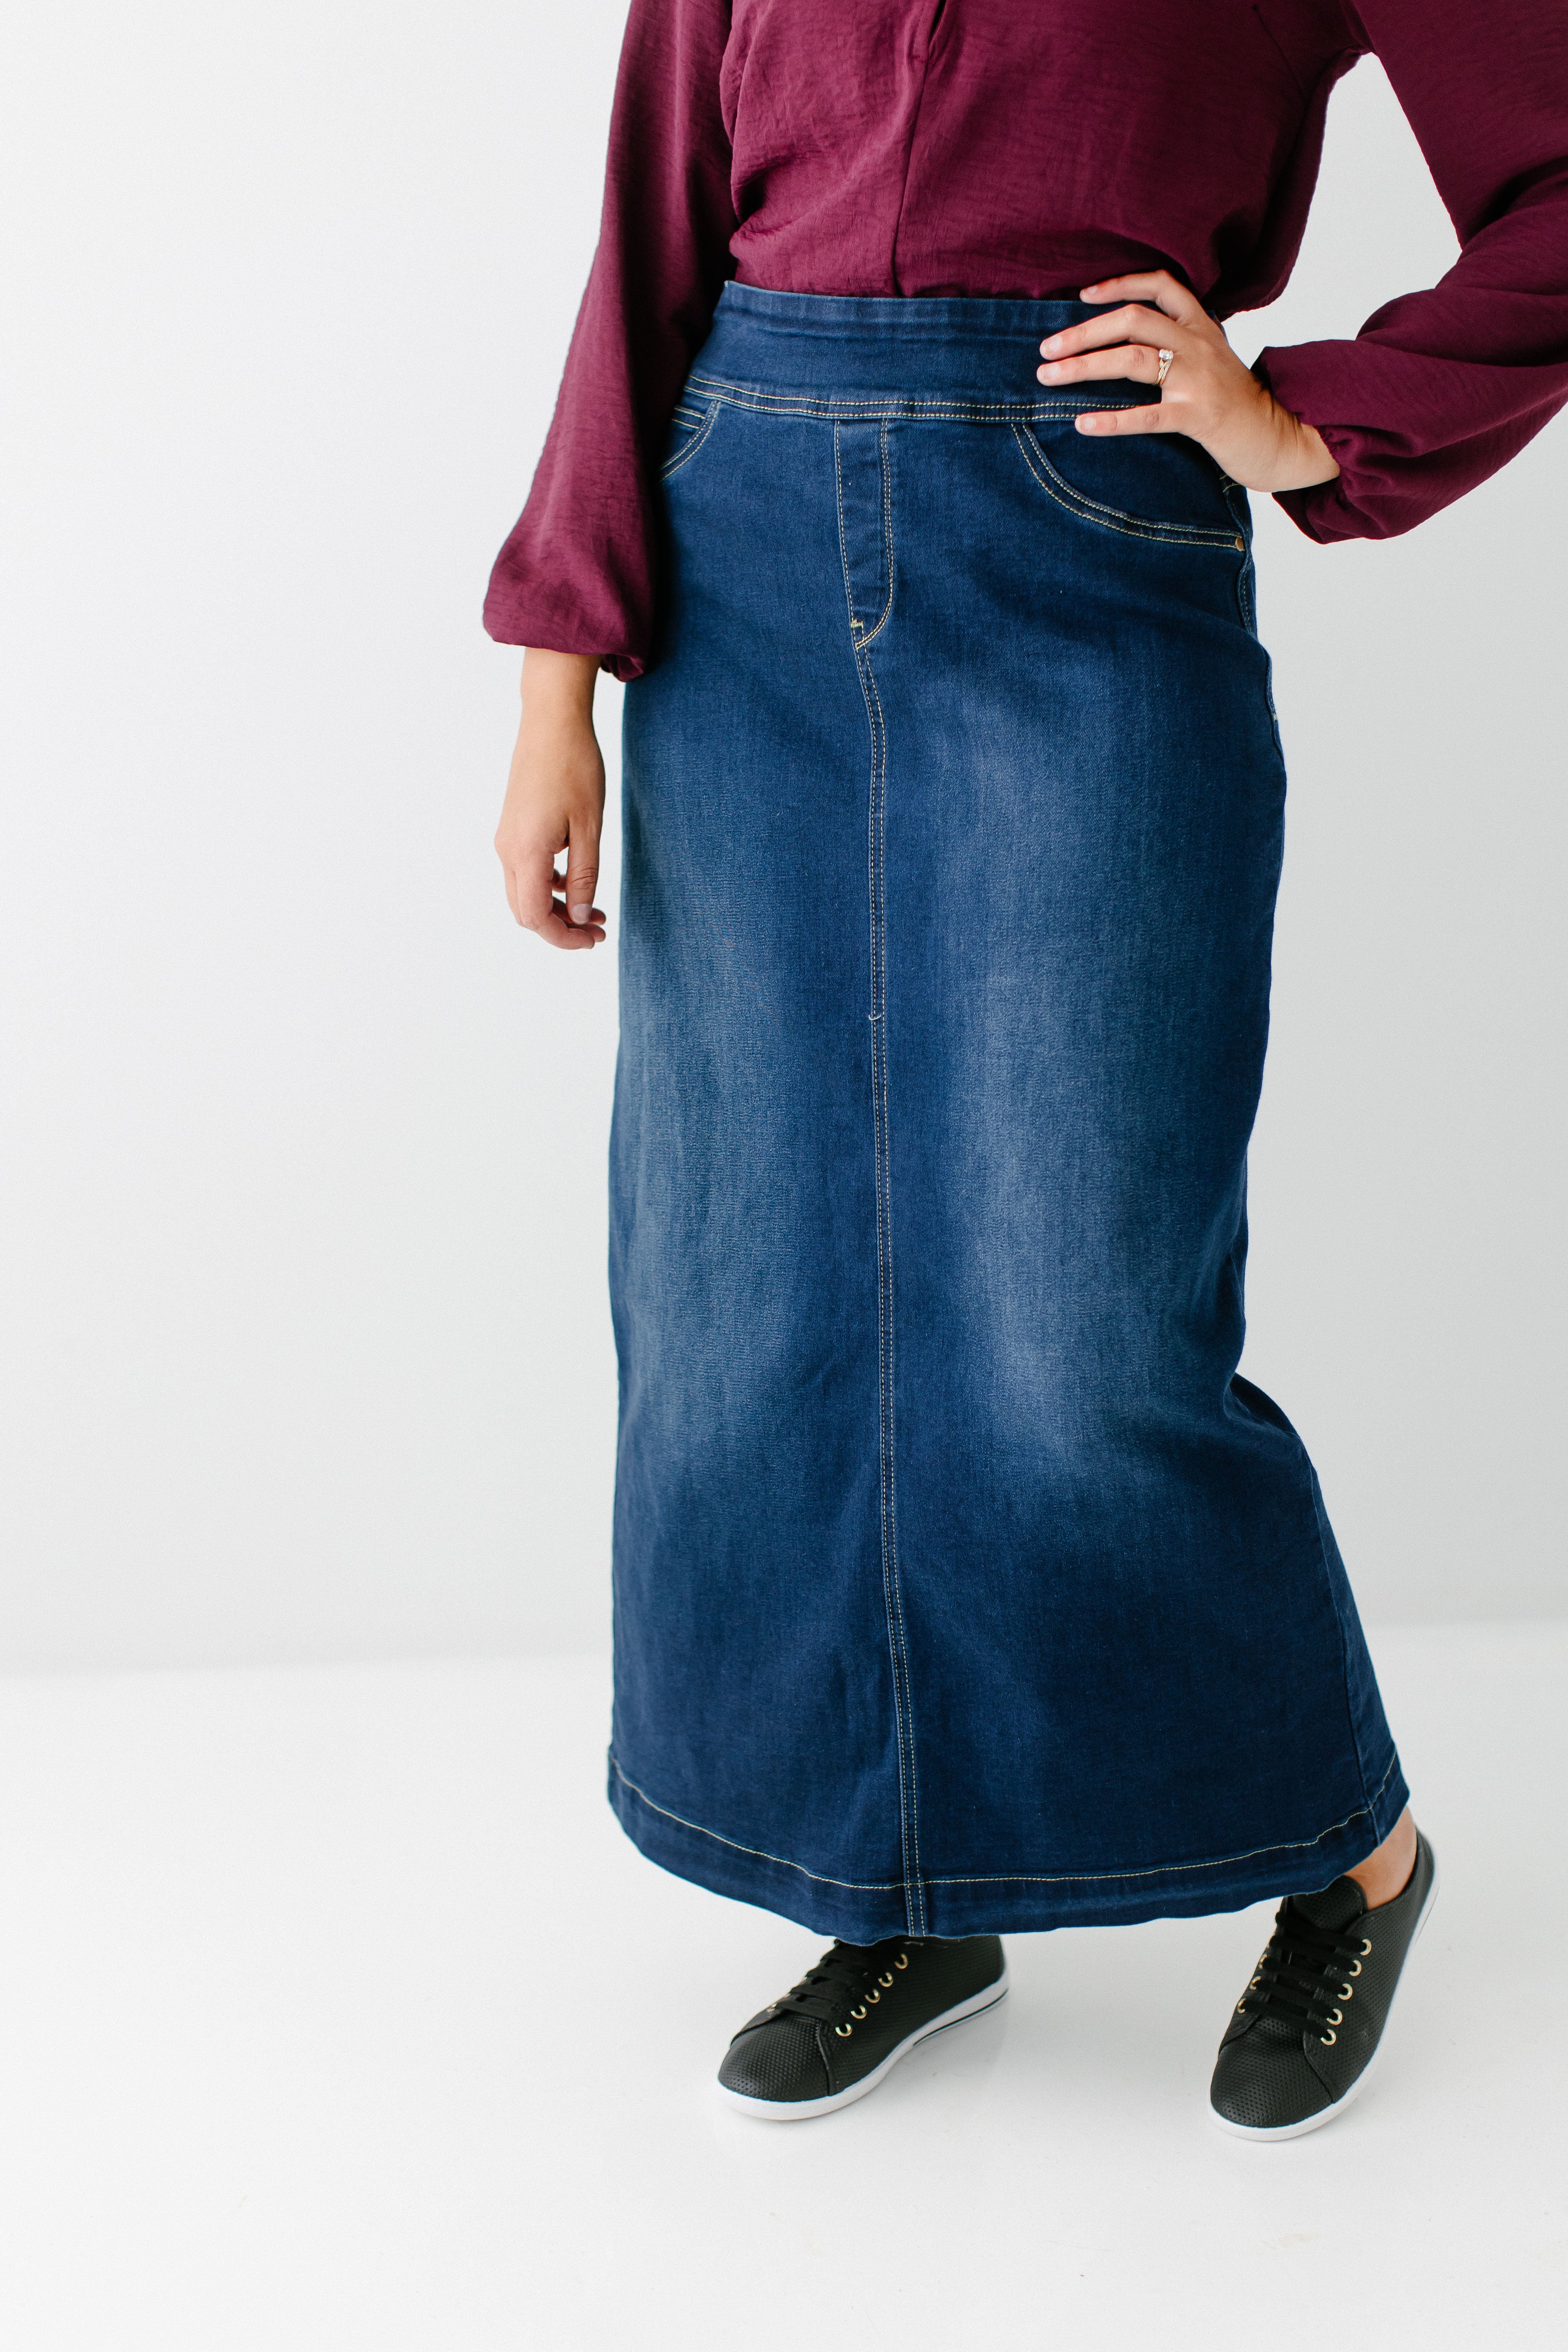 Vale Denim Long denim skirt with big pockets: for sale at 29.99€ on  Mecshopping.it